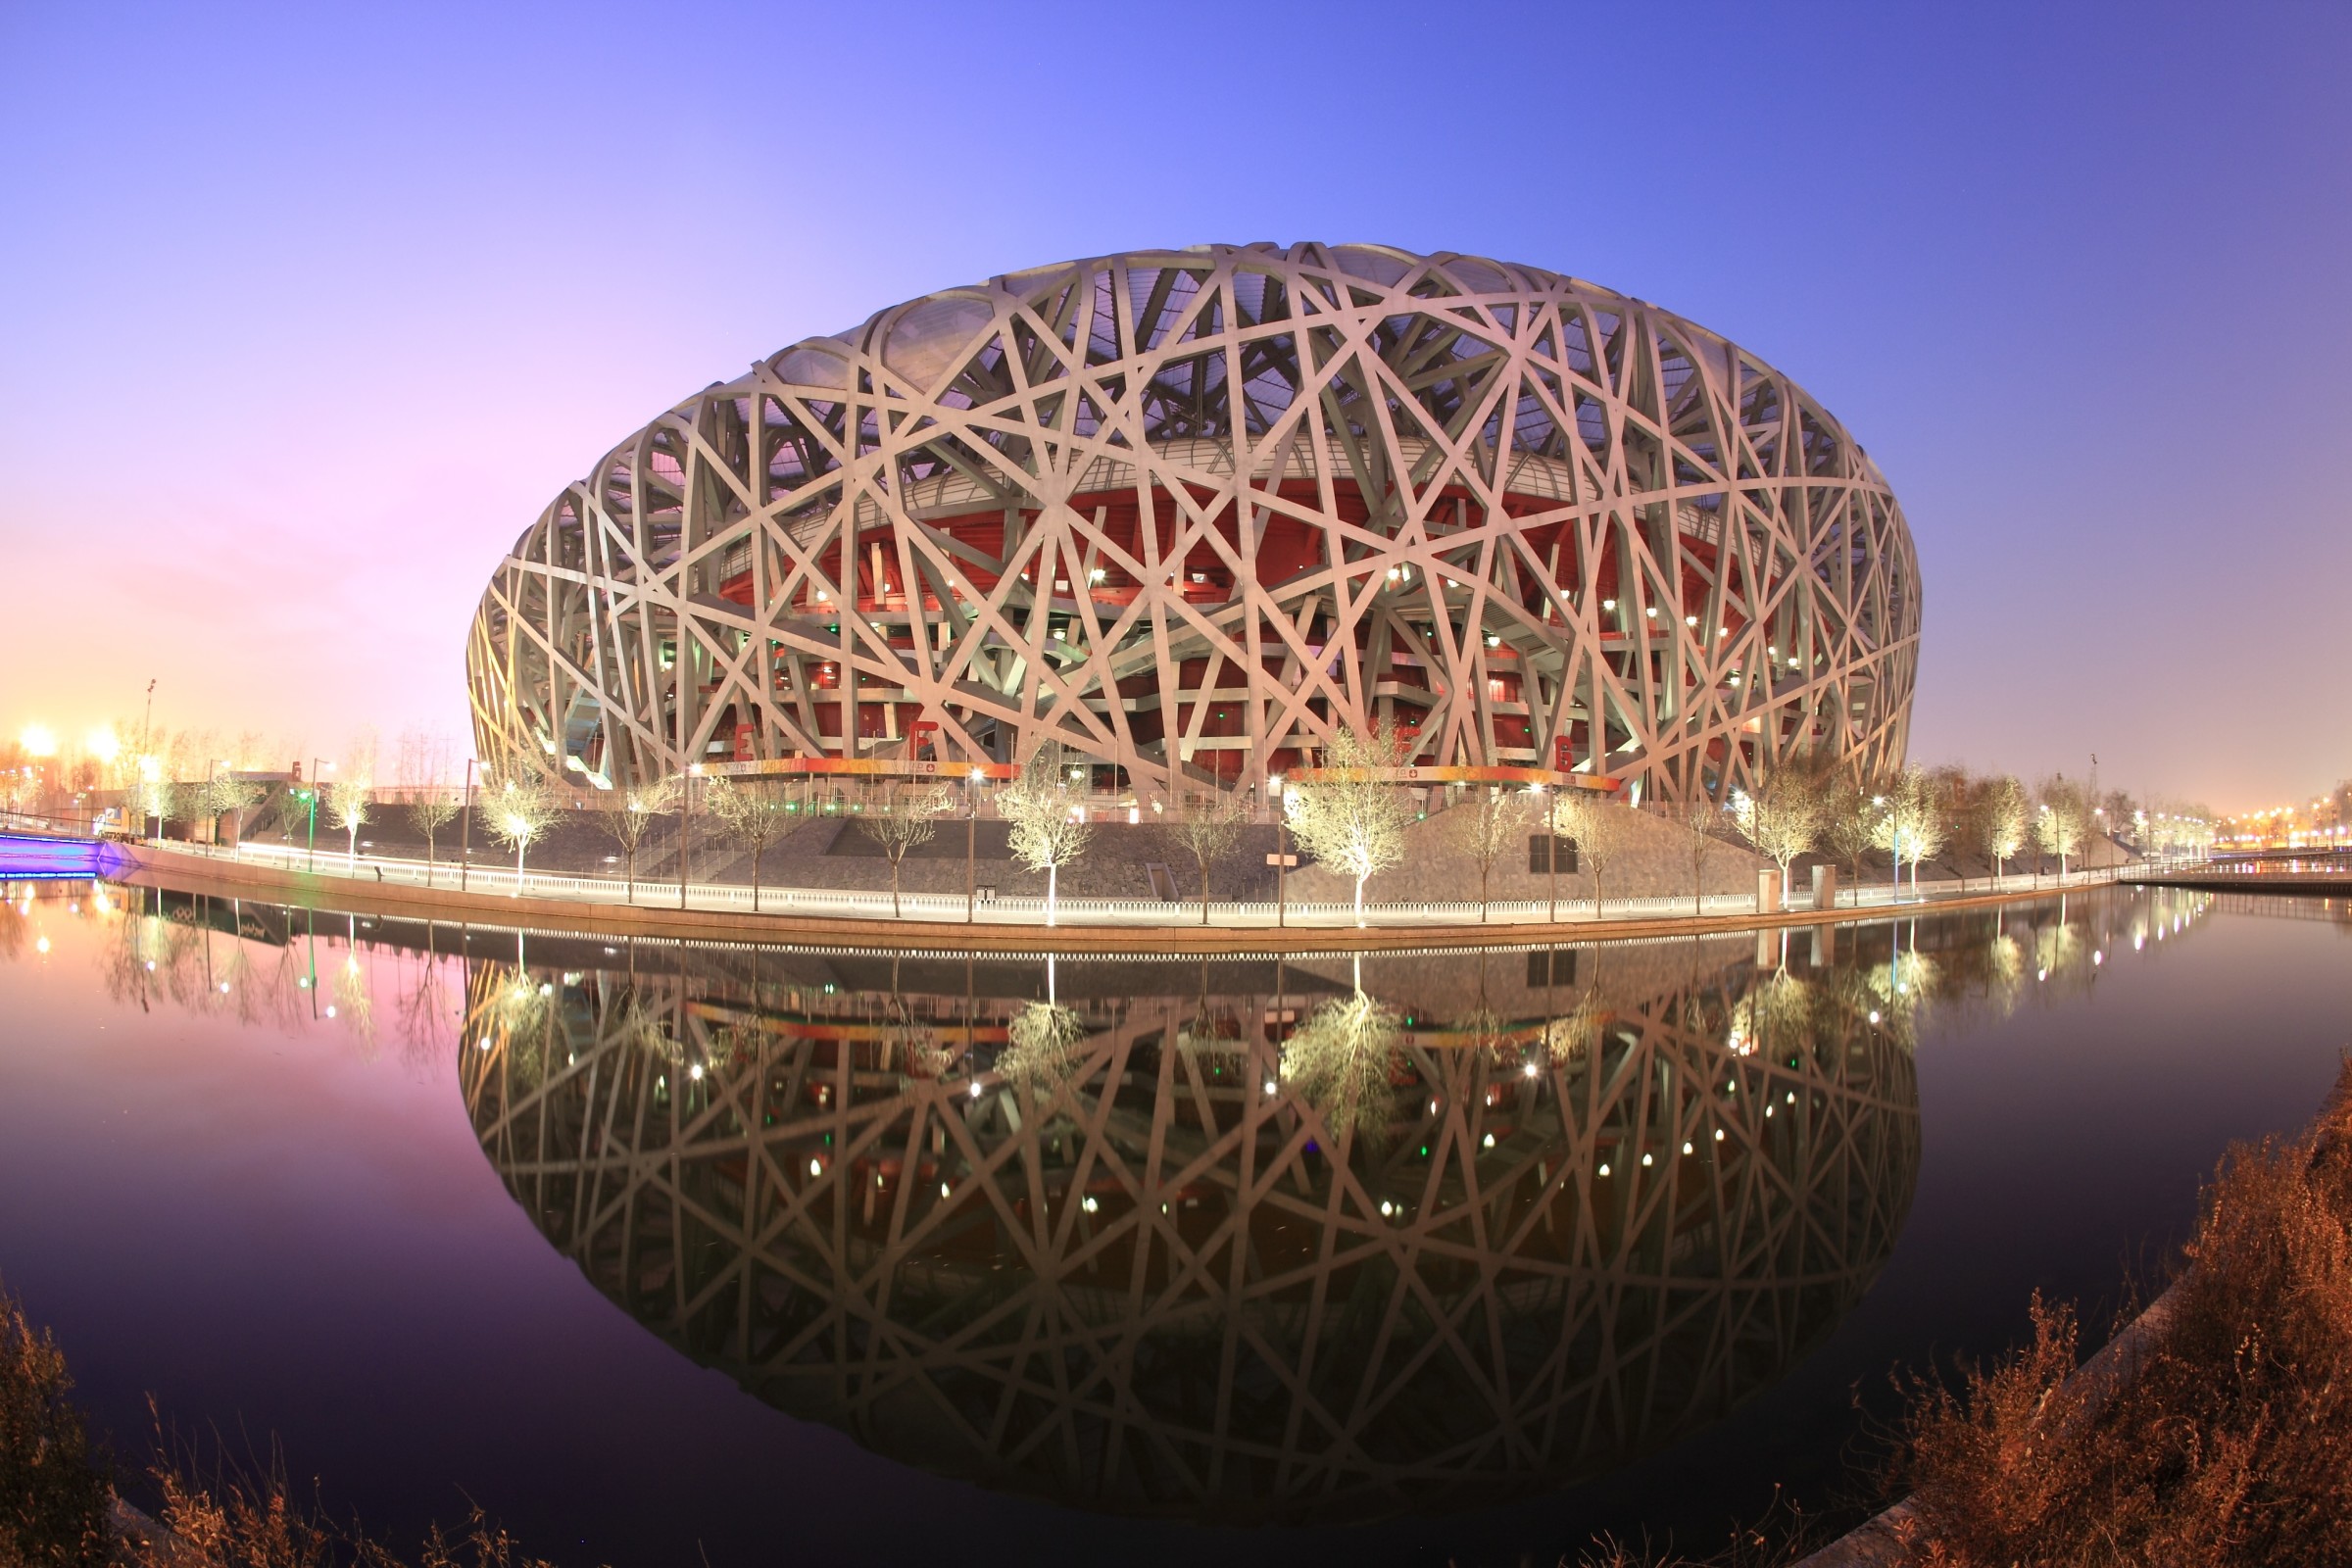 BEIJING - DECEMBER 16: The Beijing National Stadium ("The Bird's Nest"), home to the 2008 Olympic games, was converted into a ski center in mid-December 2009, on December 16, 2009 in Beijing, China.